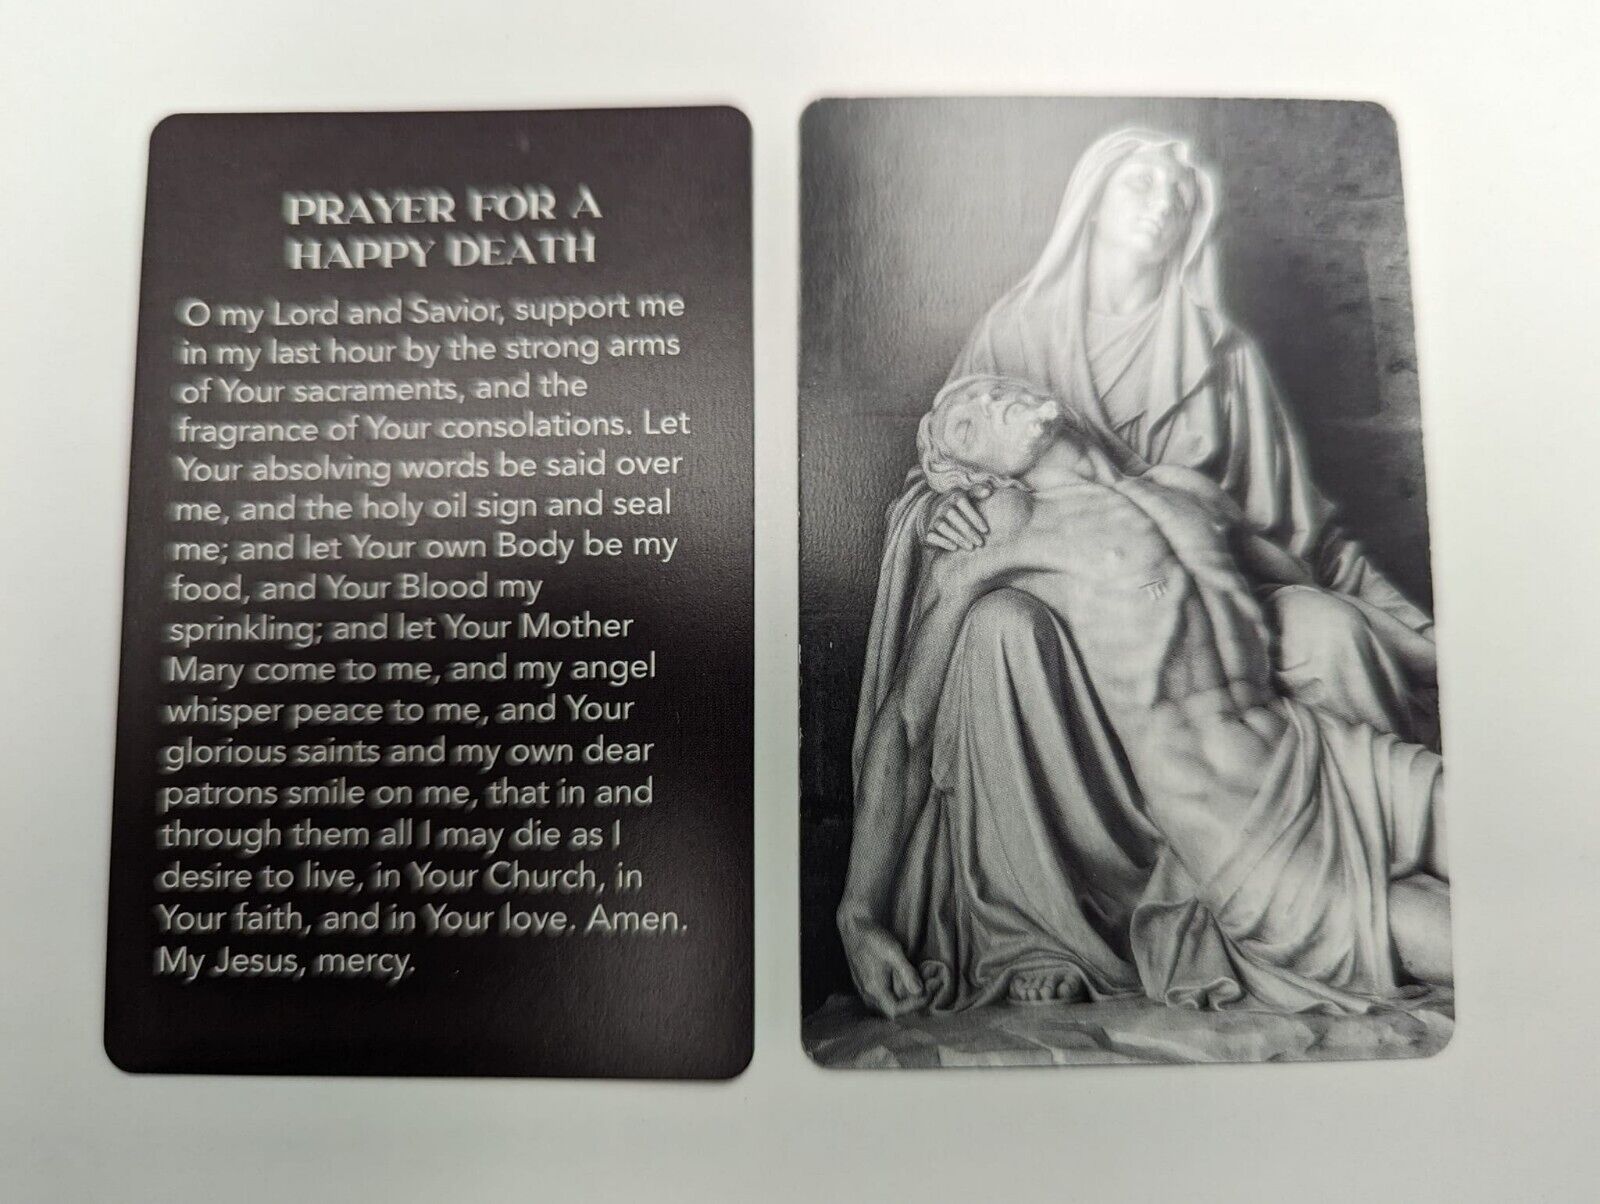 PRAYER FOR A HAPPY DEATH  (Lot of 2 Laminated Catholic Christian prayer cards